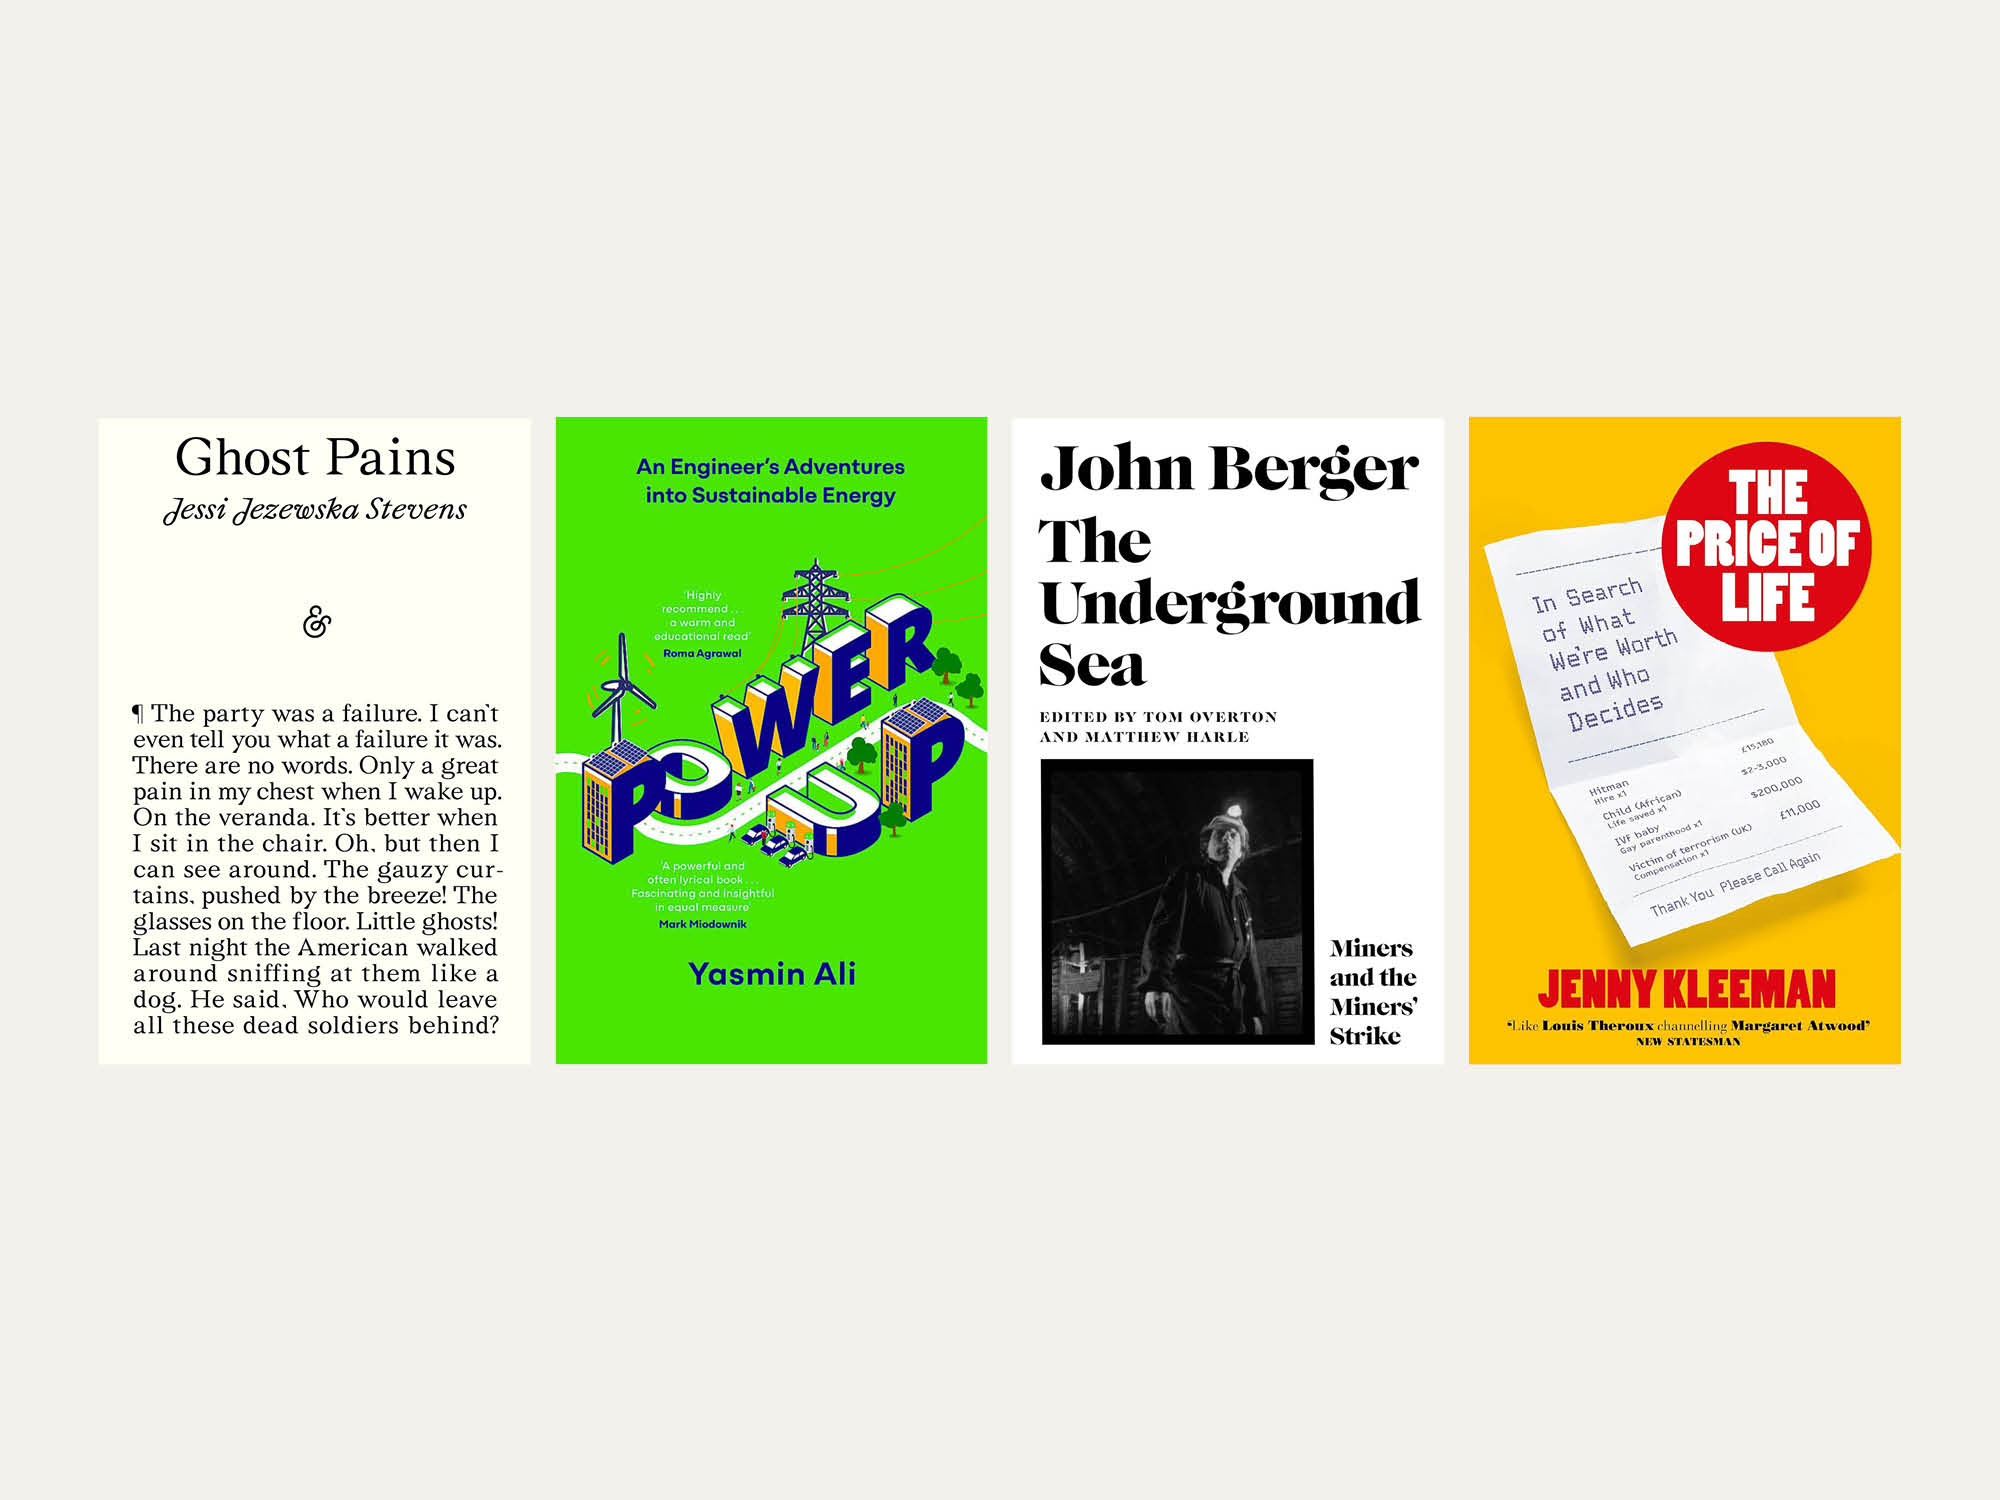 From John Berger to Jenny Kleeman: new books reviewed in short